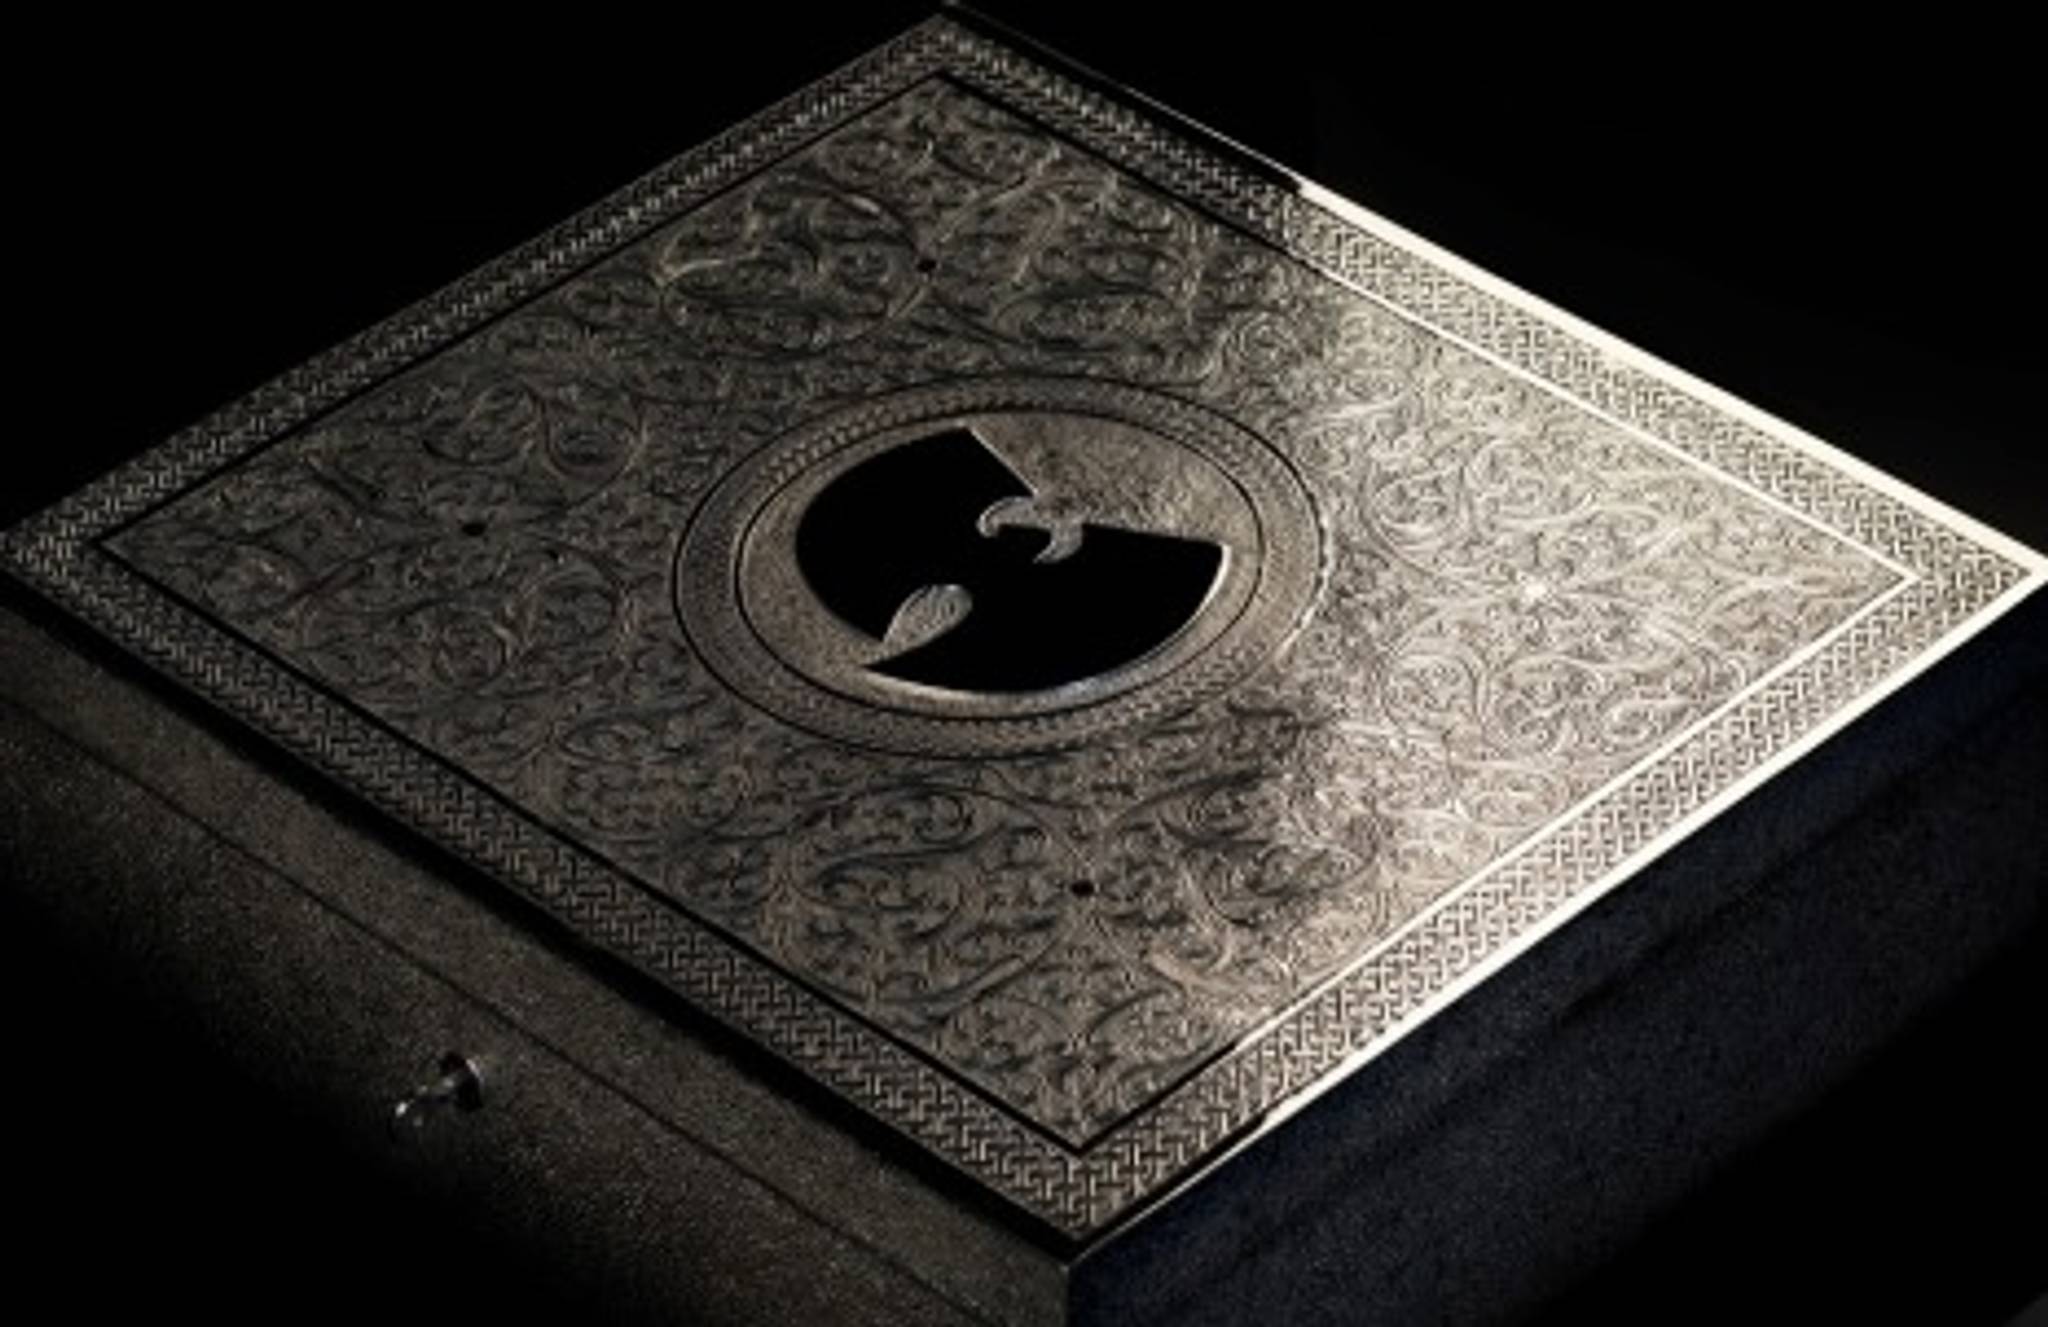 Wu-Tang to sell one copy of album